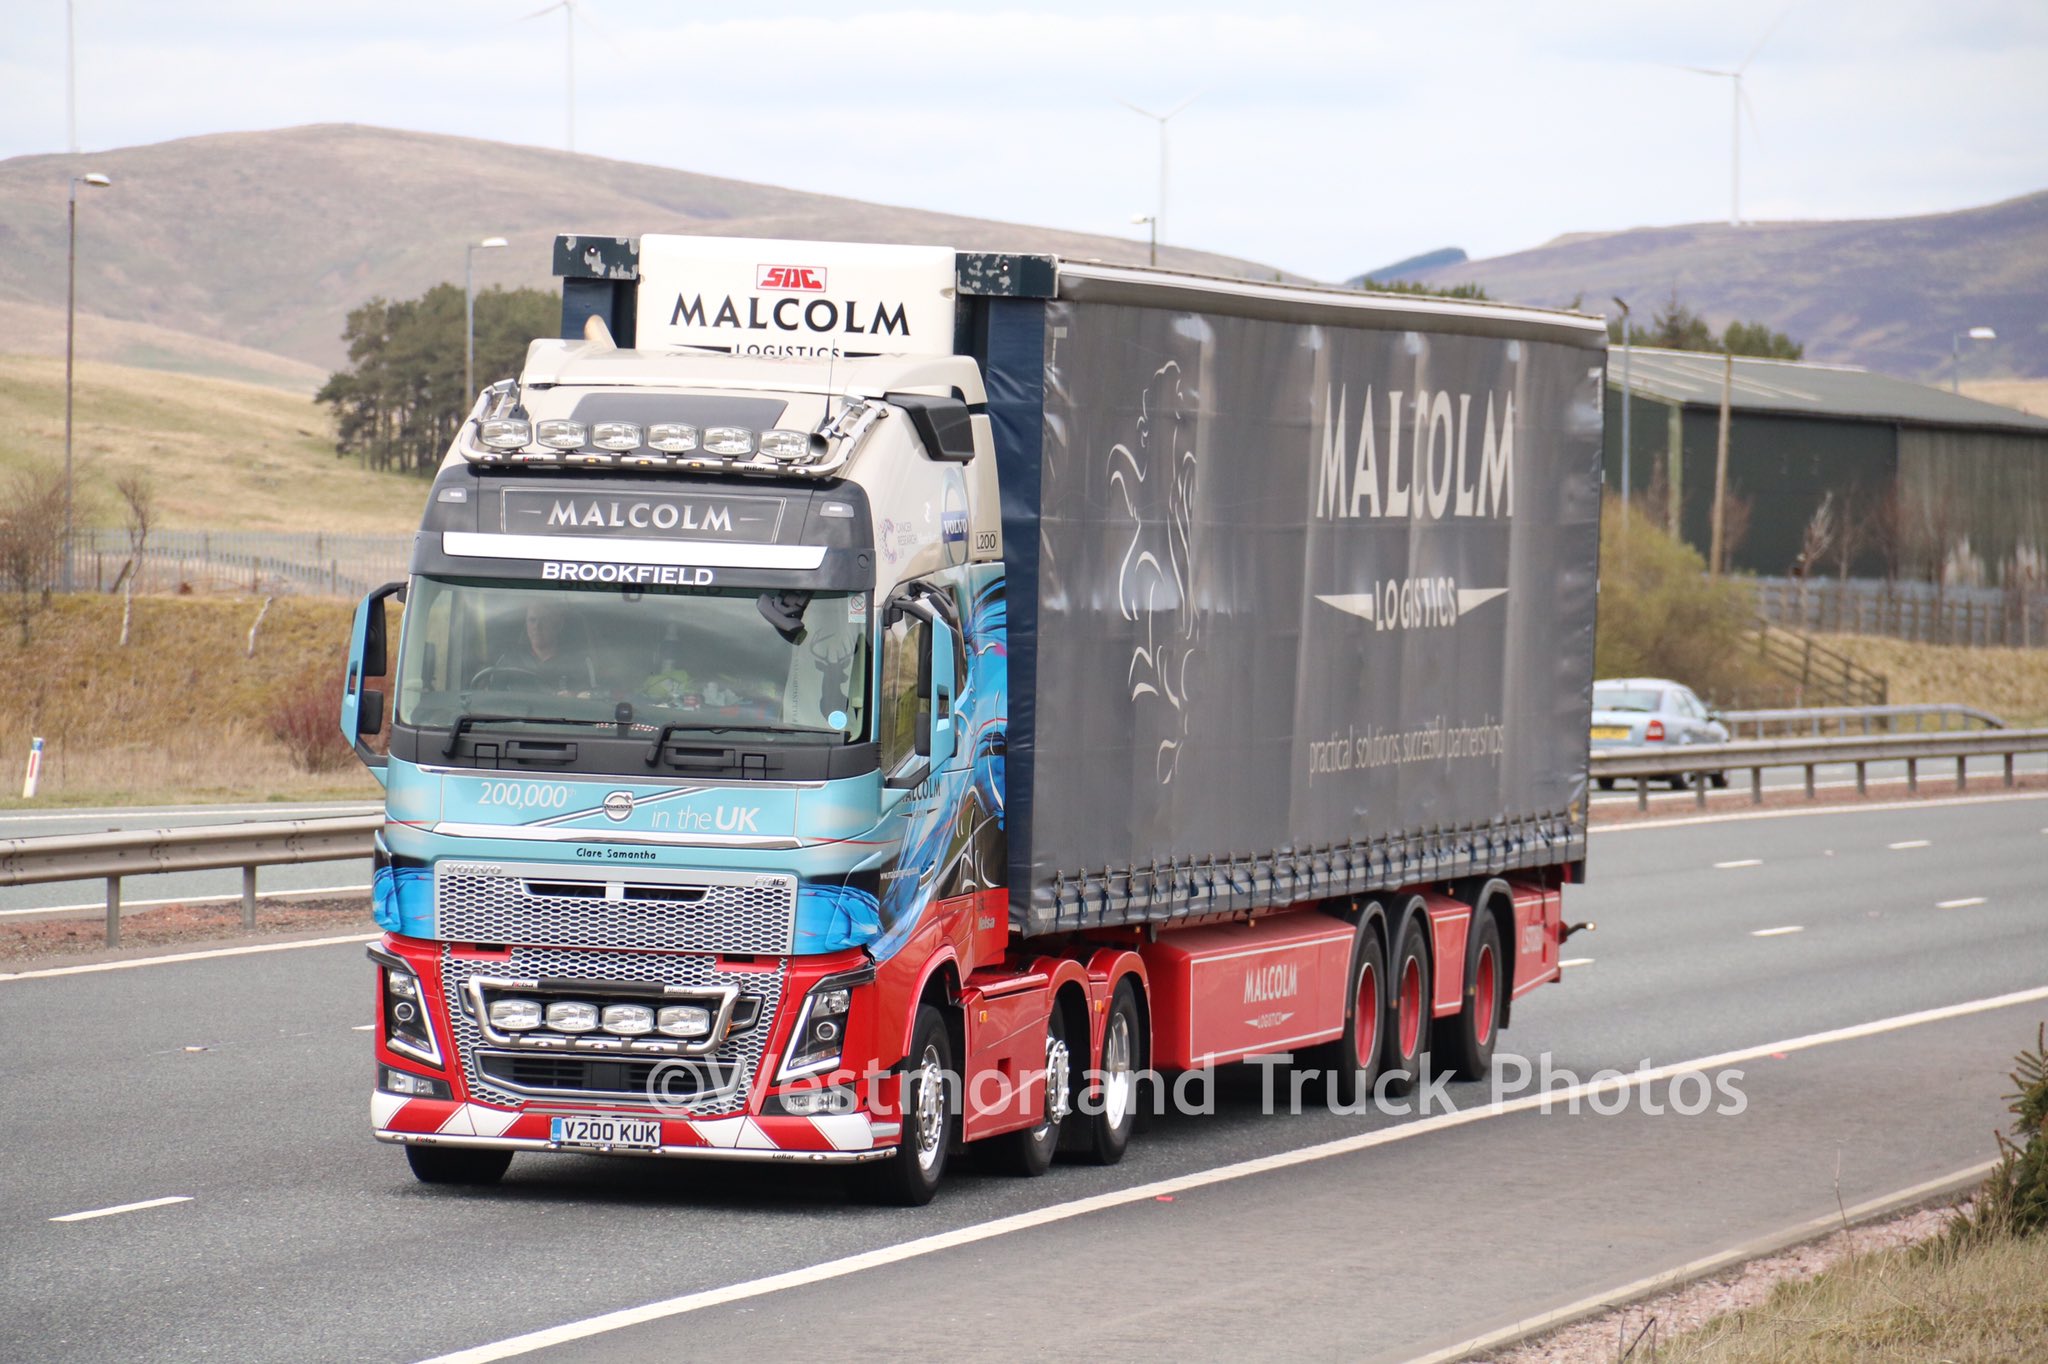 Westmorland Truck Photos on Twitter "W H Malcolm